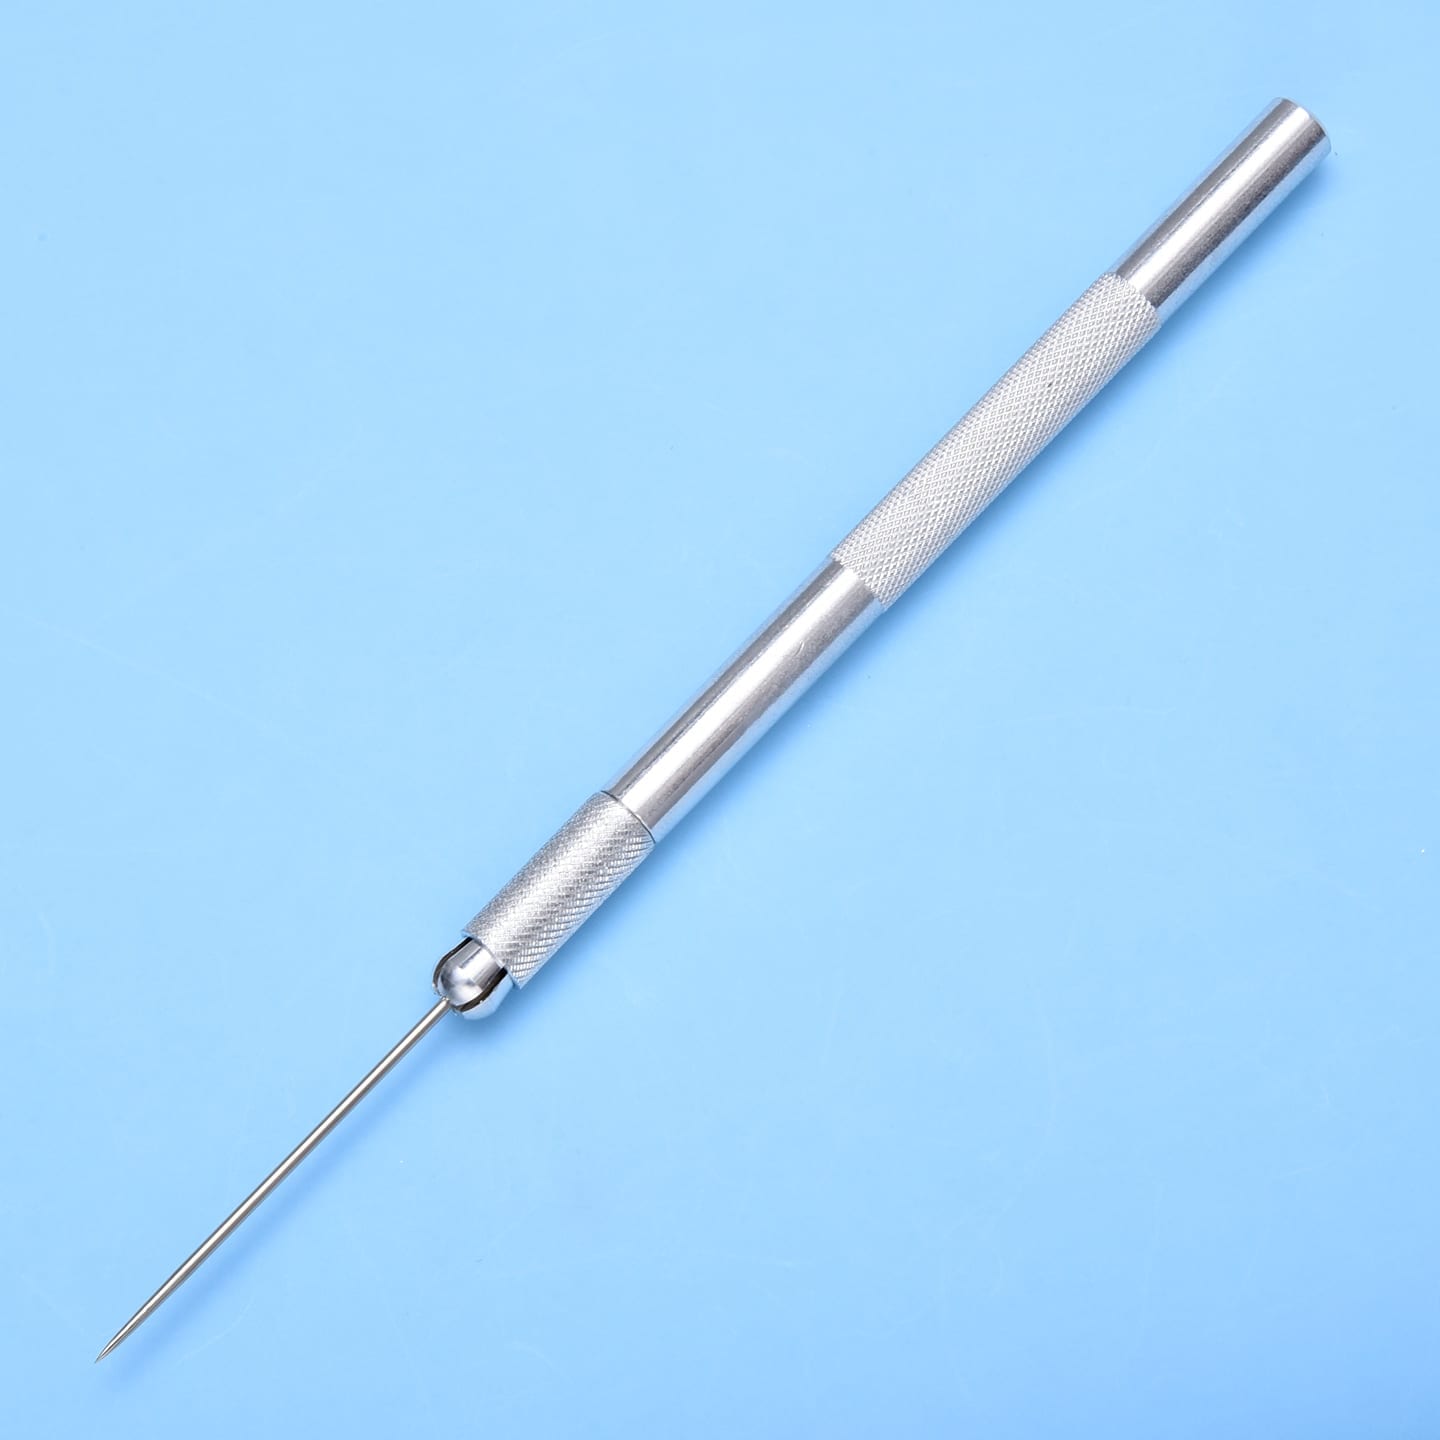 Aluminum Bodkin and Holder - Fly Tying Tool 